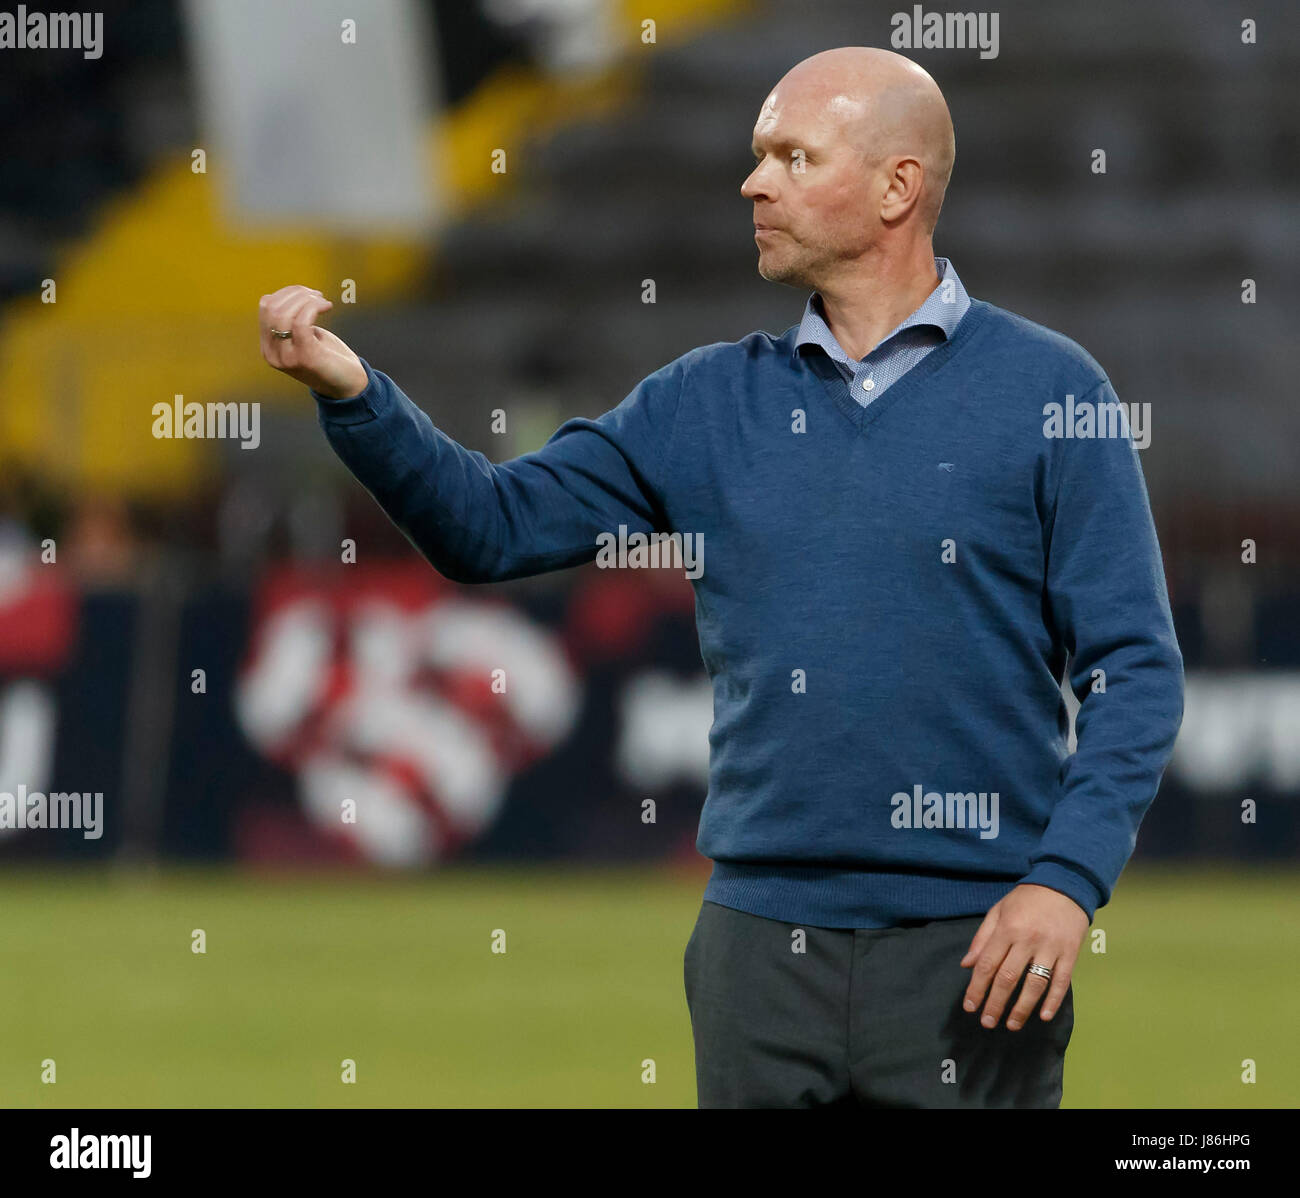 Budapest, Hungary. 27th May, 2017. Head coach Henning Berg of Videoton FC instructs his players during the Hungarian OTP Bank Liga match between Budapest Honved and Videoton FC at Bozsik Stadium on May 27, 2017 in Budapest, Hungary. Credit: Laszlo Szirtesi/Alamy Live News Stock Photo